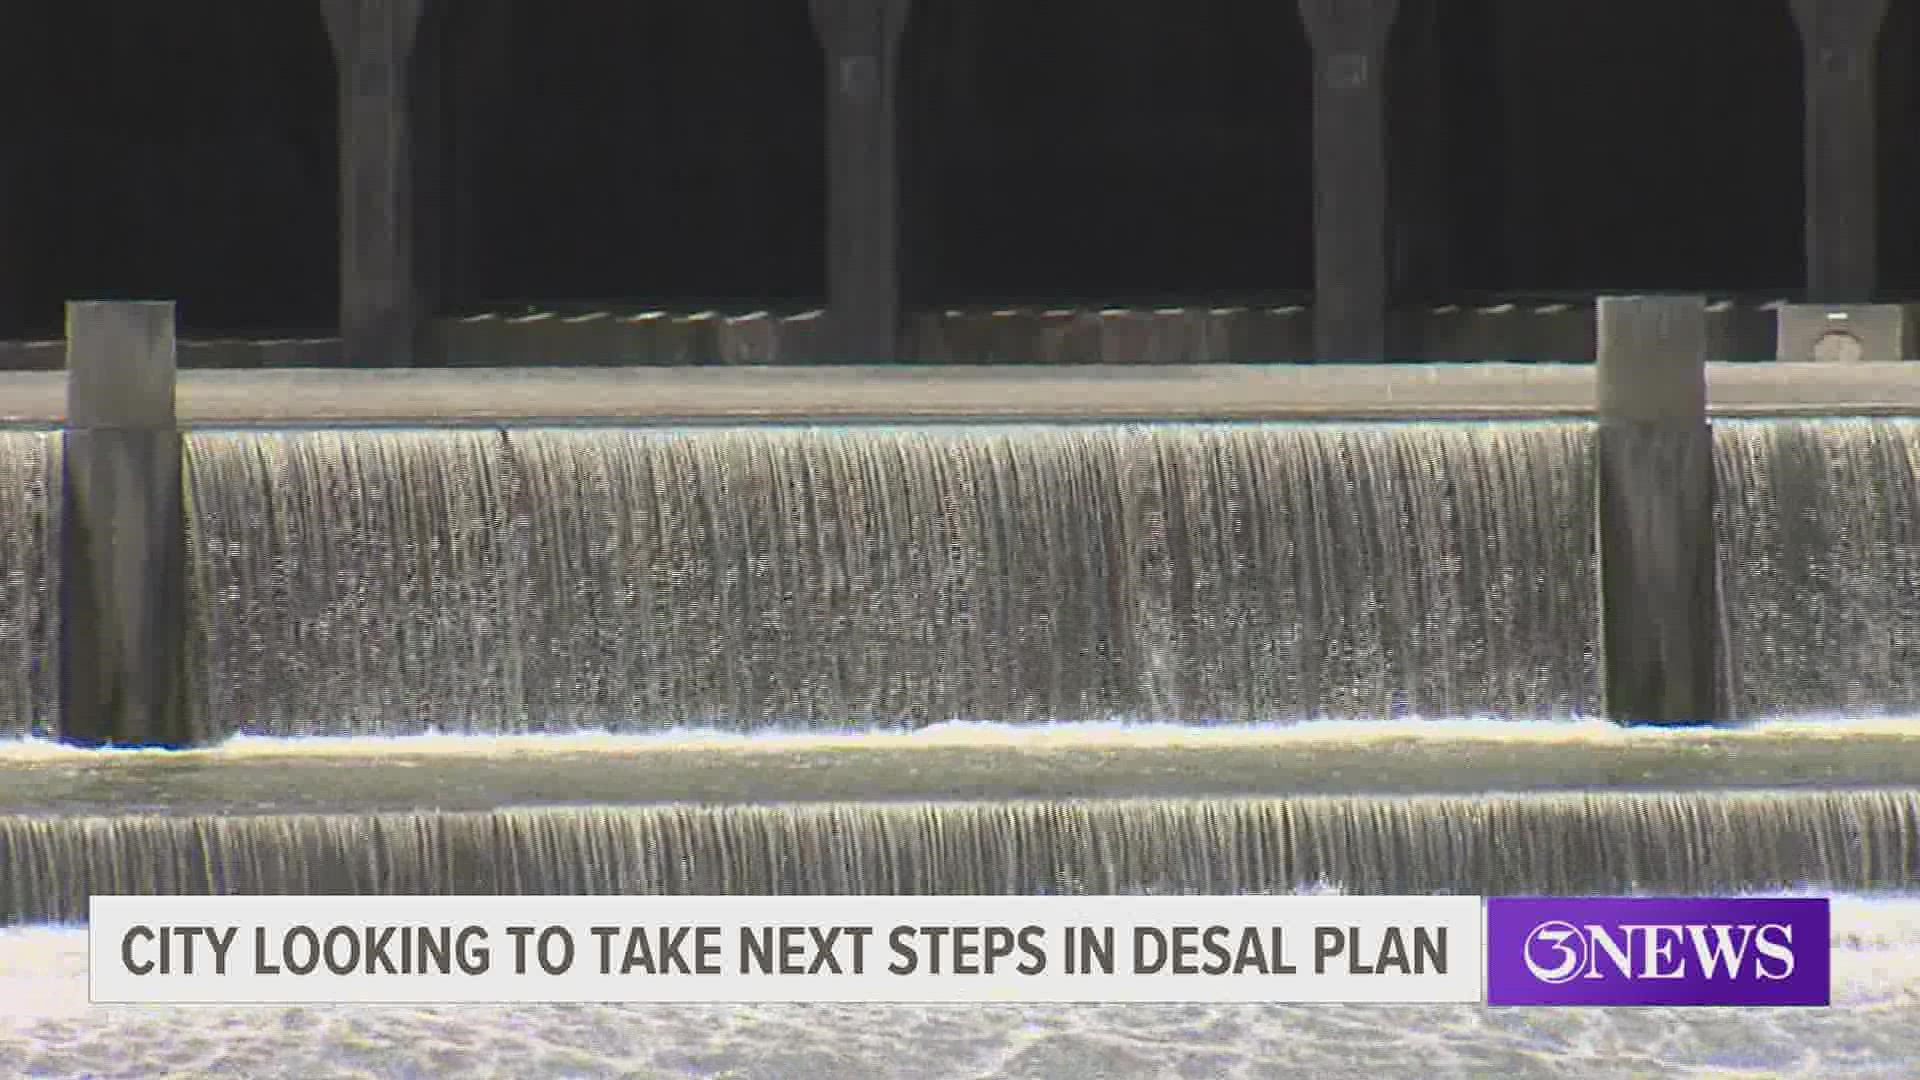 City leaders are anxious to get the proposed $200 million desal plant project started.